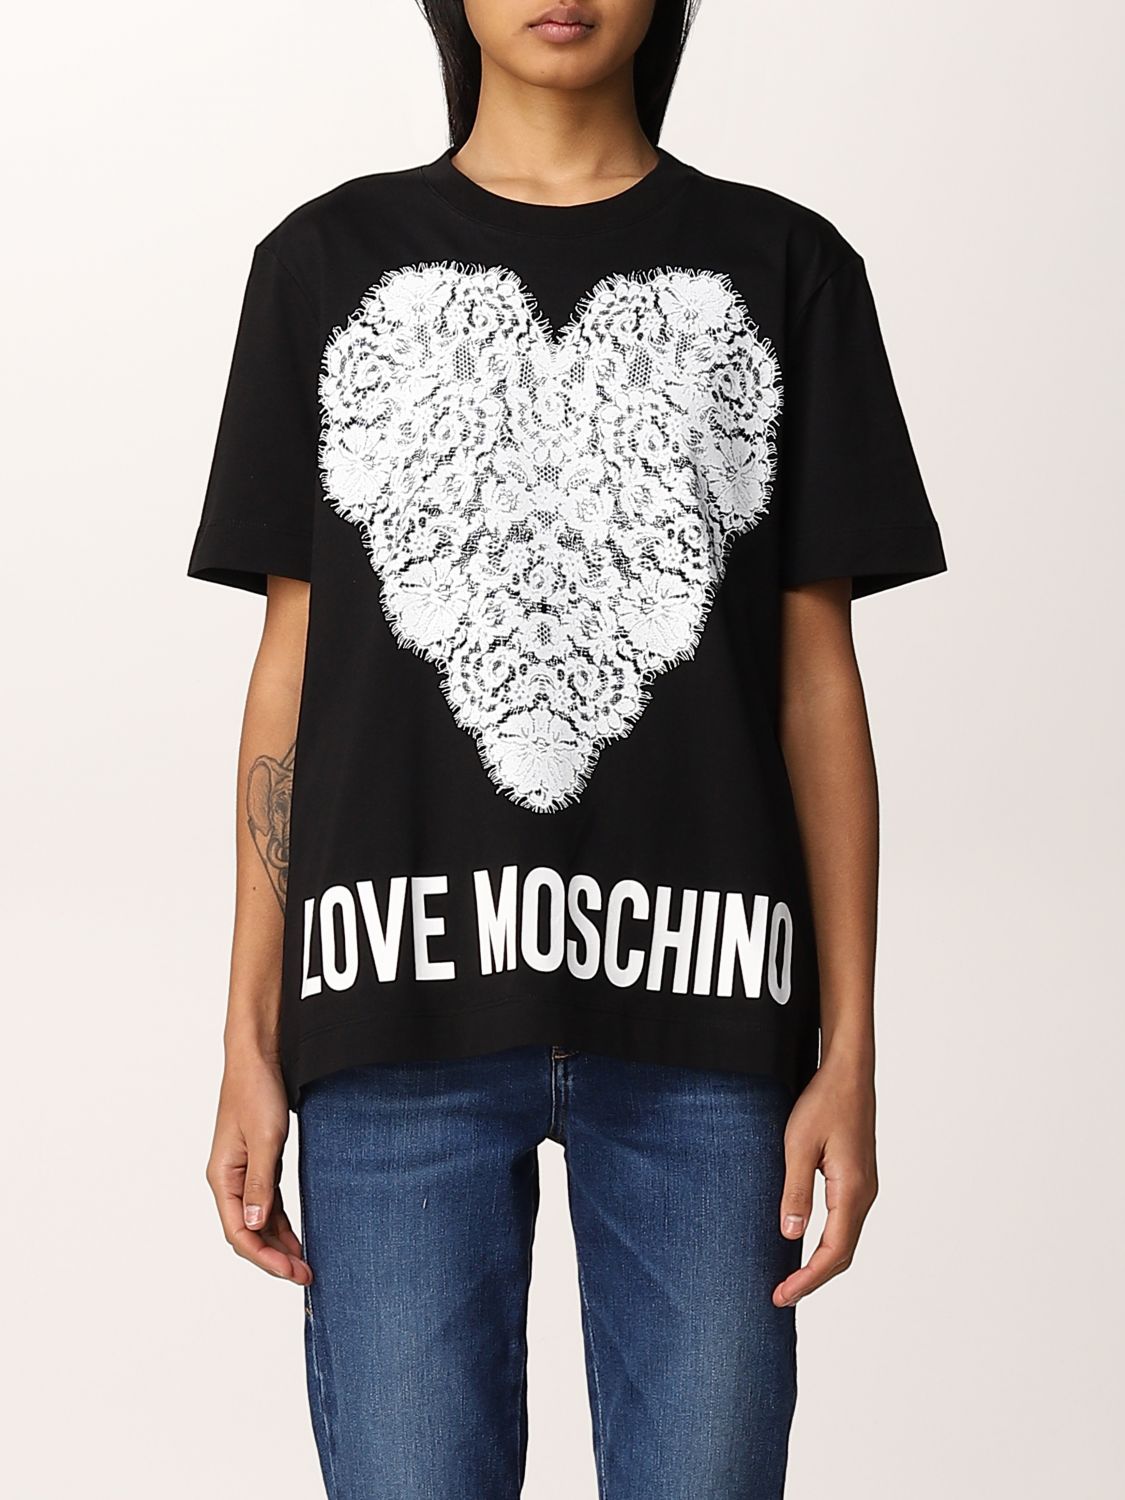 LOVE MOSCHINO: T-shirt with maxi heart in lace - Black | Love Moschino ...